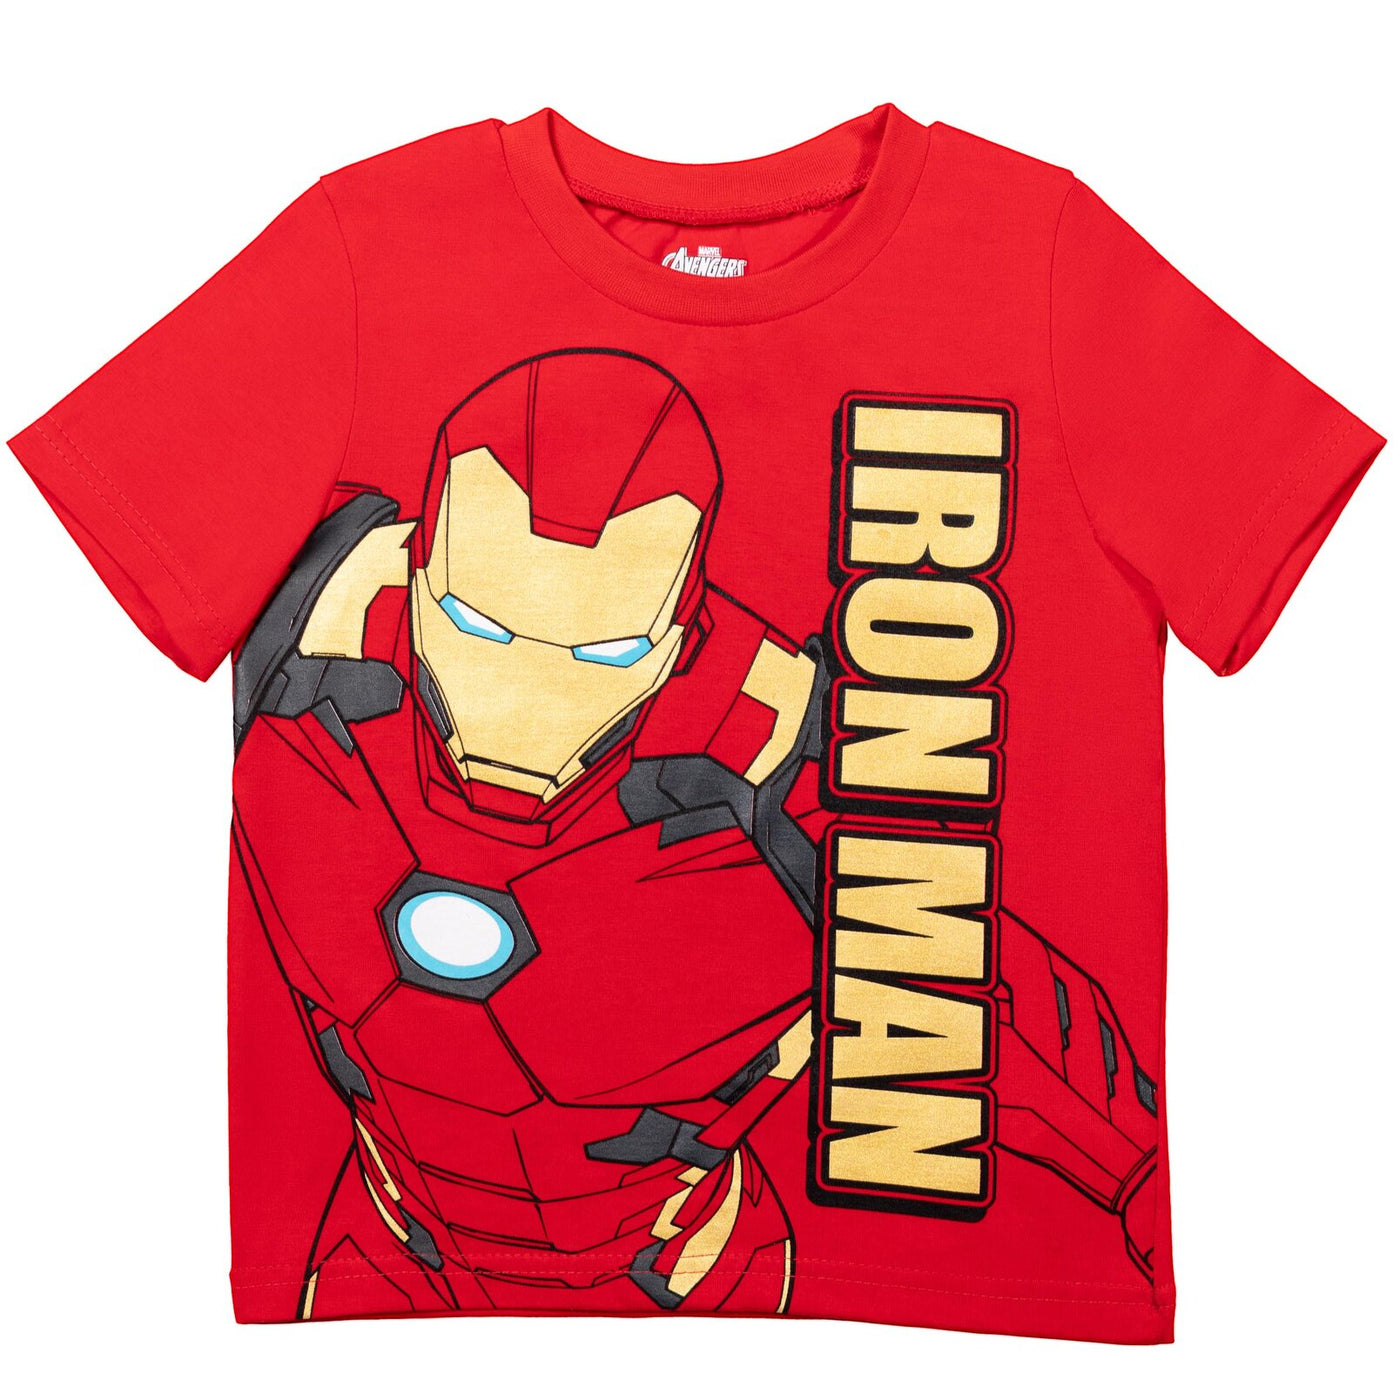 Marvel Avengers Iron Man T-Shirt and Mesh Shorts Outfit Set